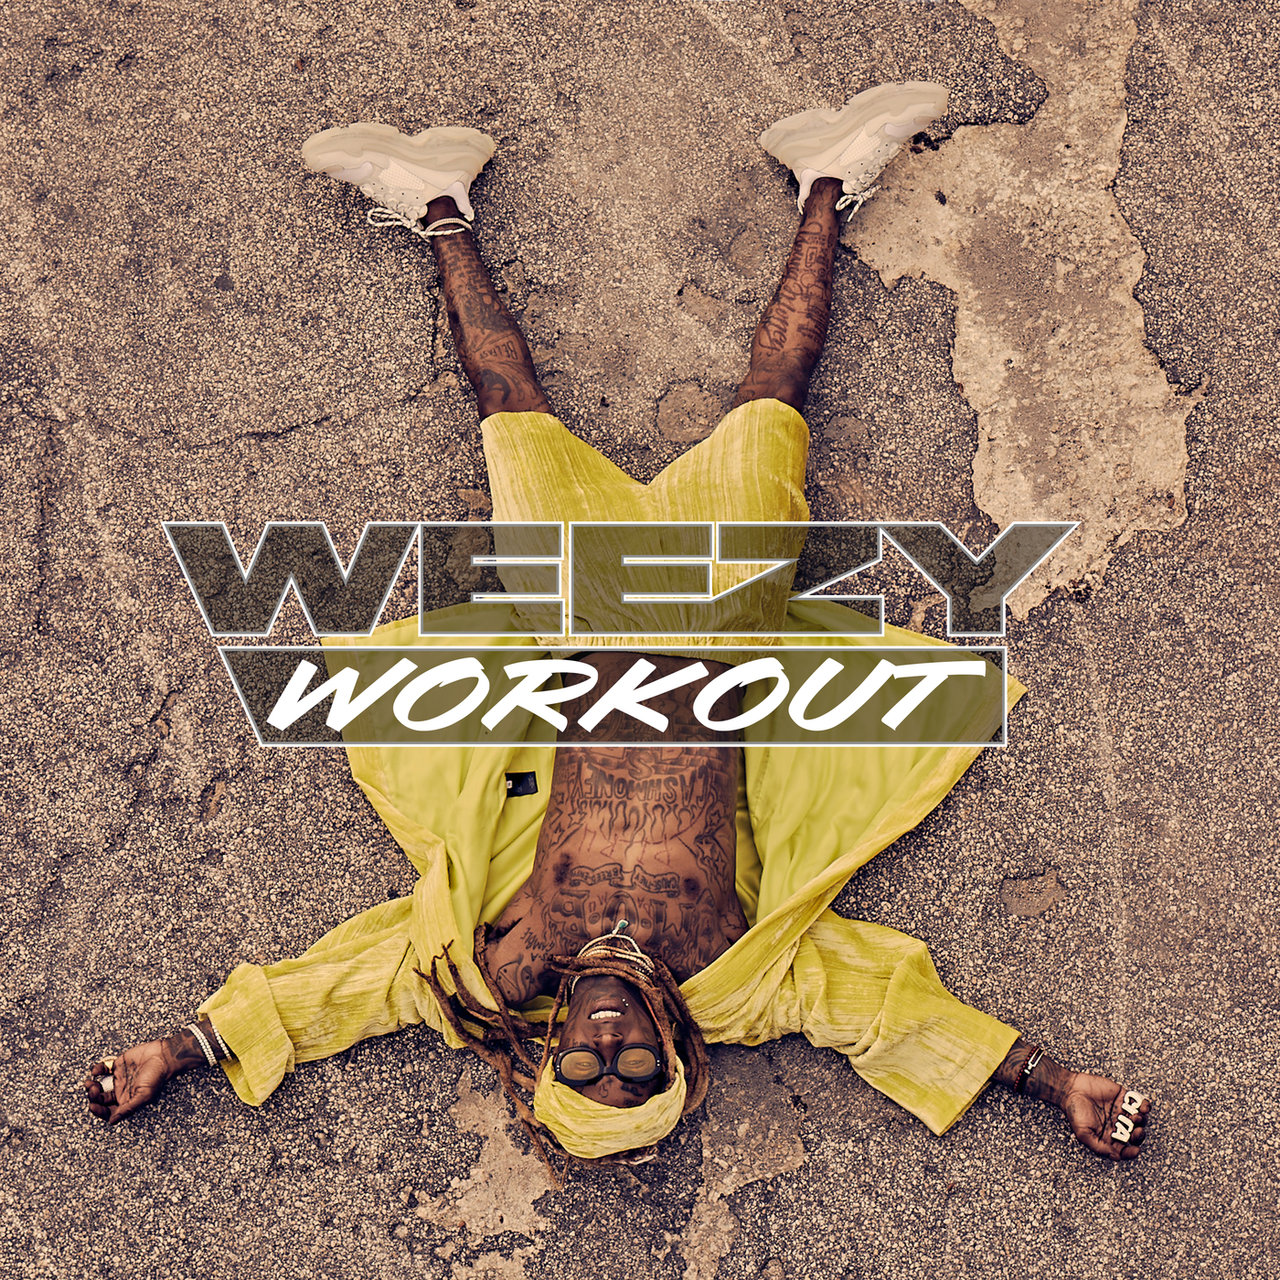 Lil Wayne - Weezy Workout (Cover)